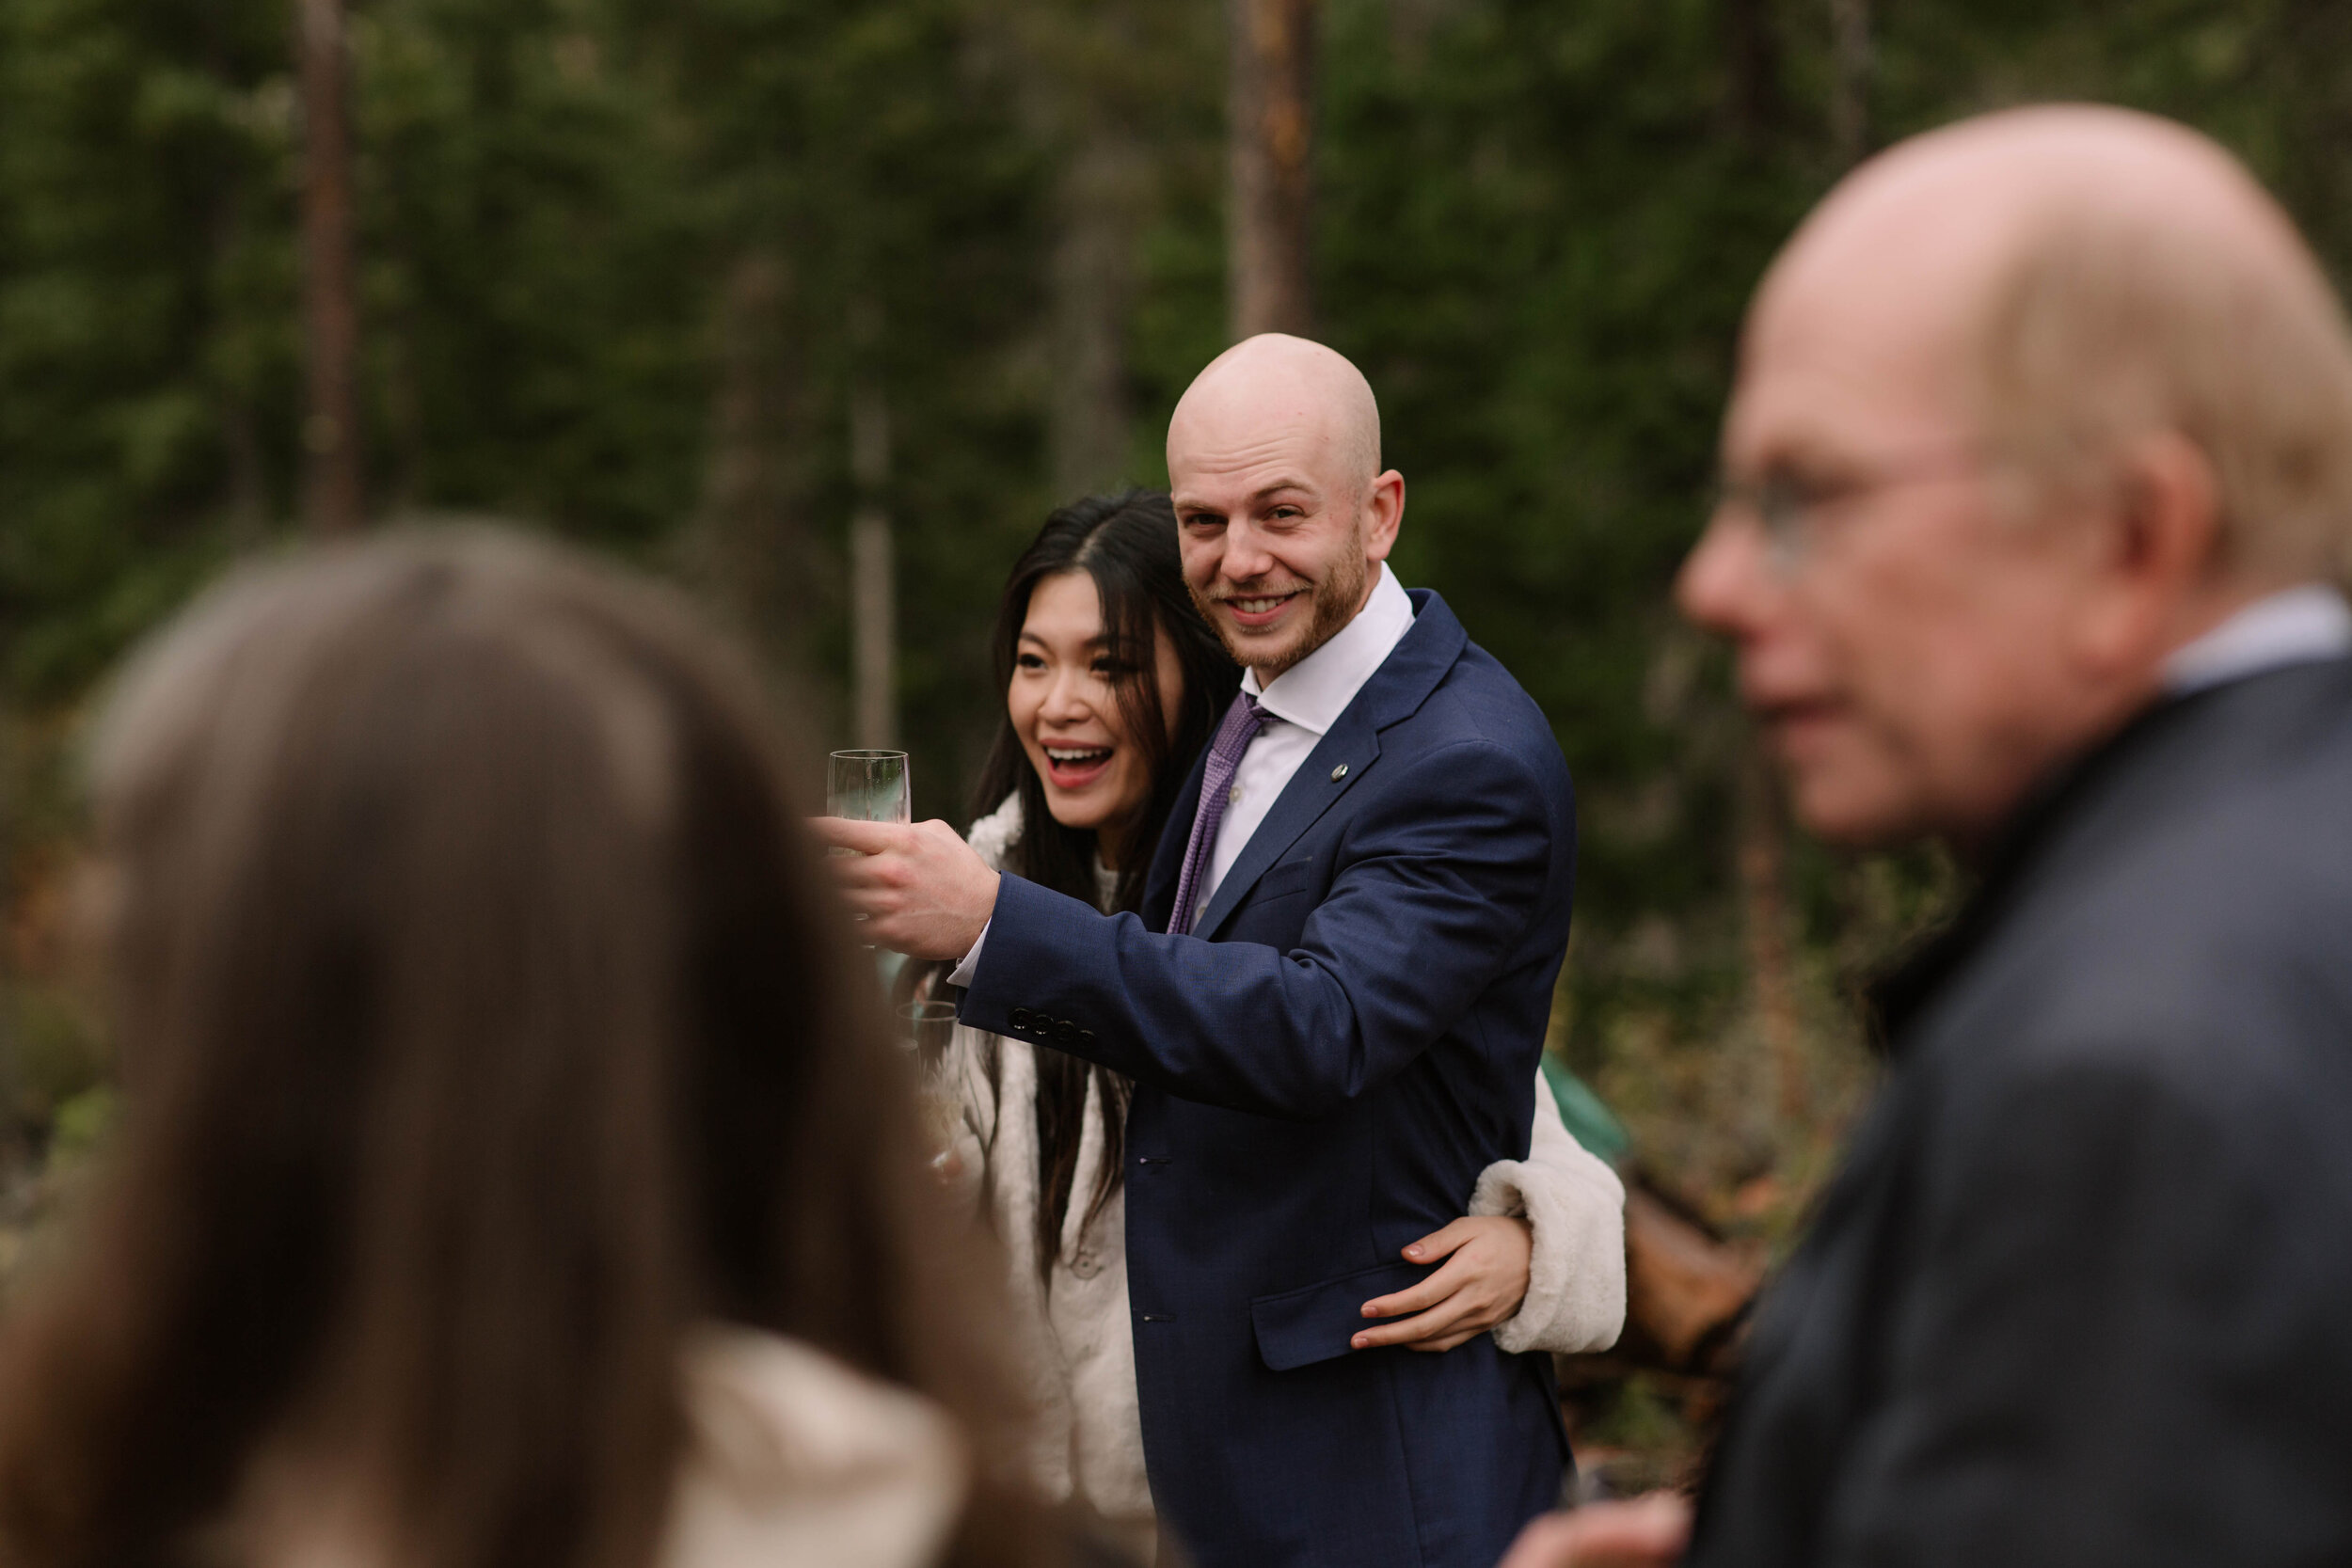 socal-san-diego-southern-california-elopement-small-wedding-outdoor-forest-mountains-waterfall-ceremony-leavenworth-washington-photographer-12.jpg